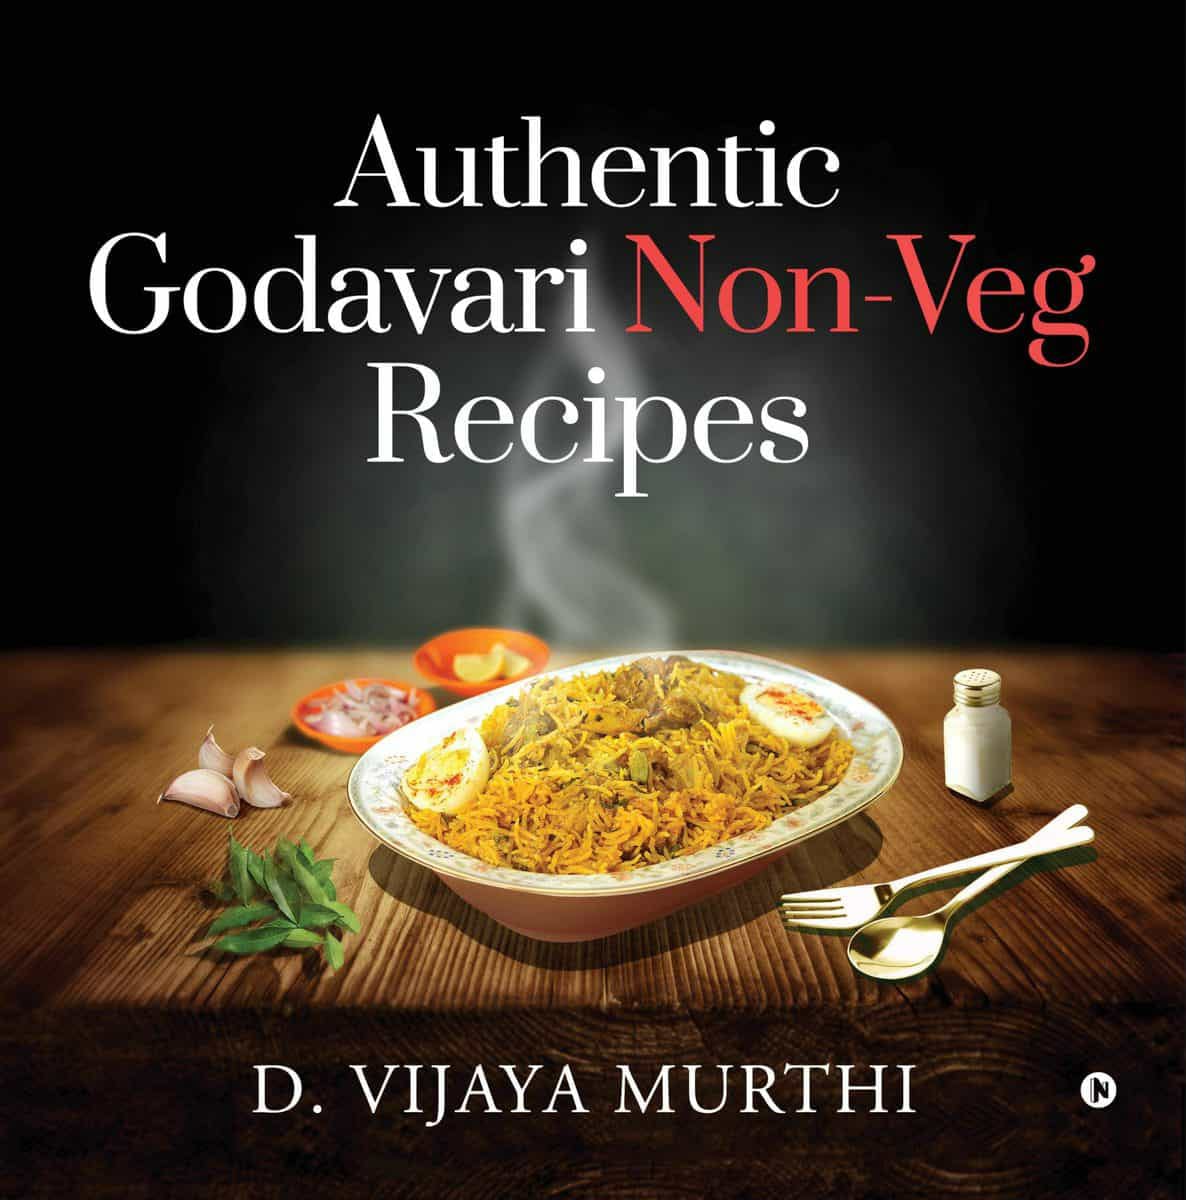 A Woman Turns Author With 'Authentic Godavari Non-Veg Recipes' Cook ...